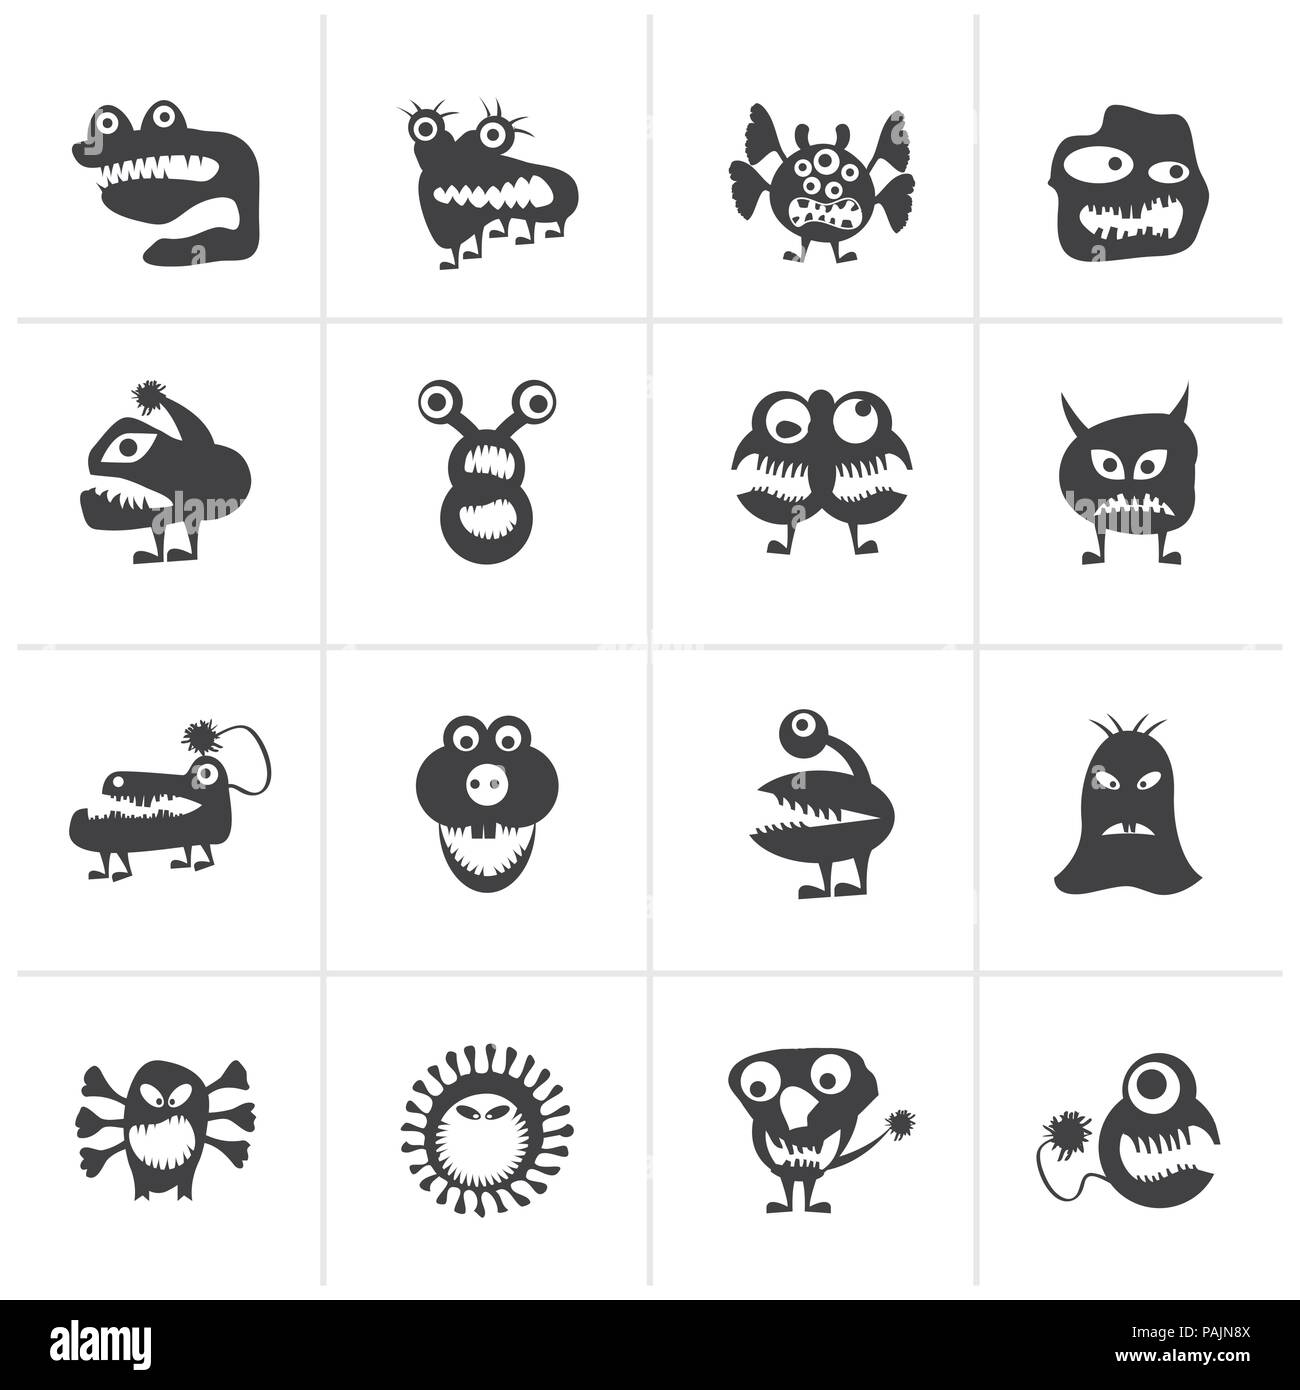 Black various abstract monsters illustration - vector icon set Stock Vector